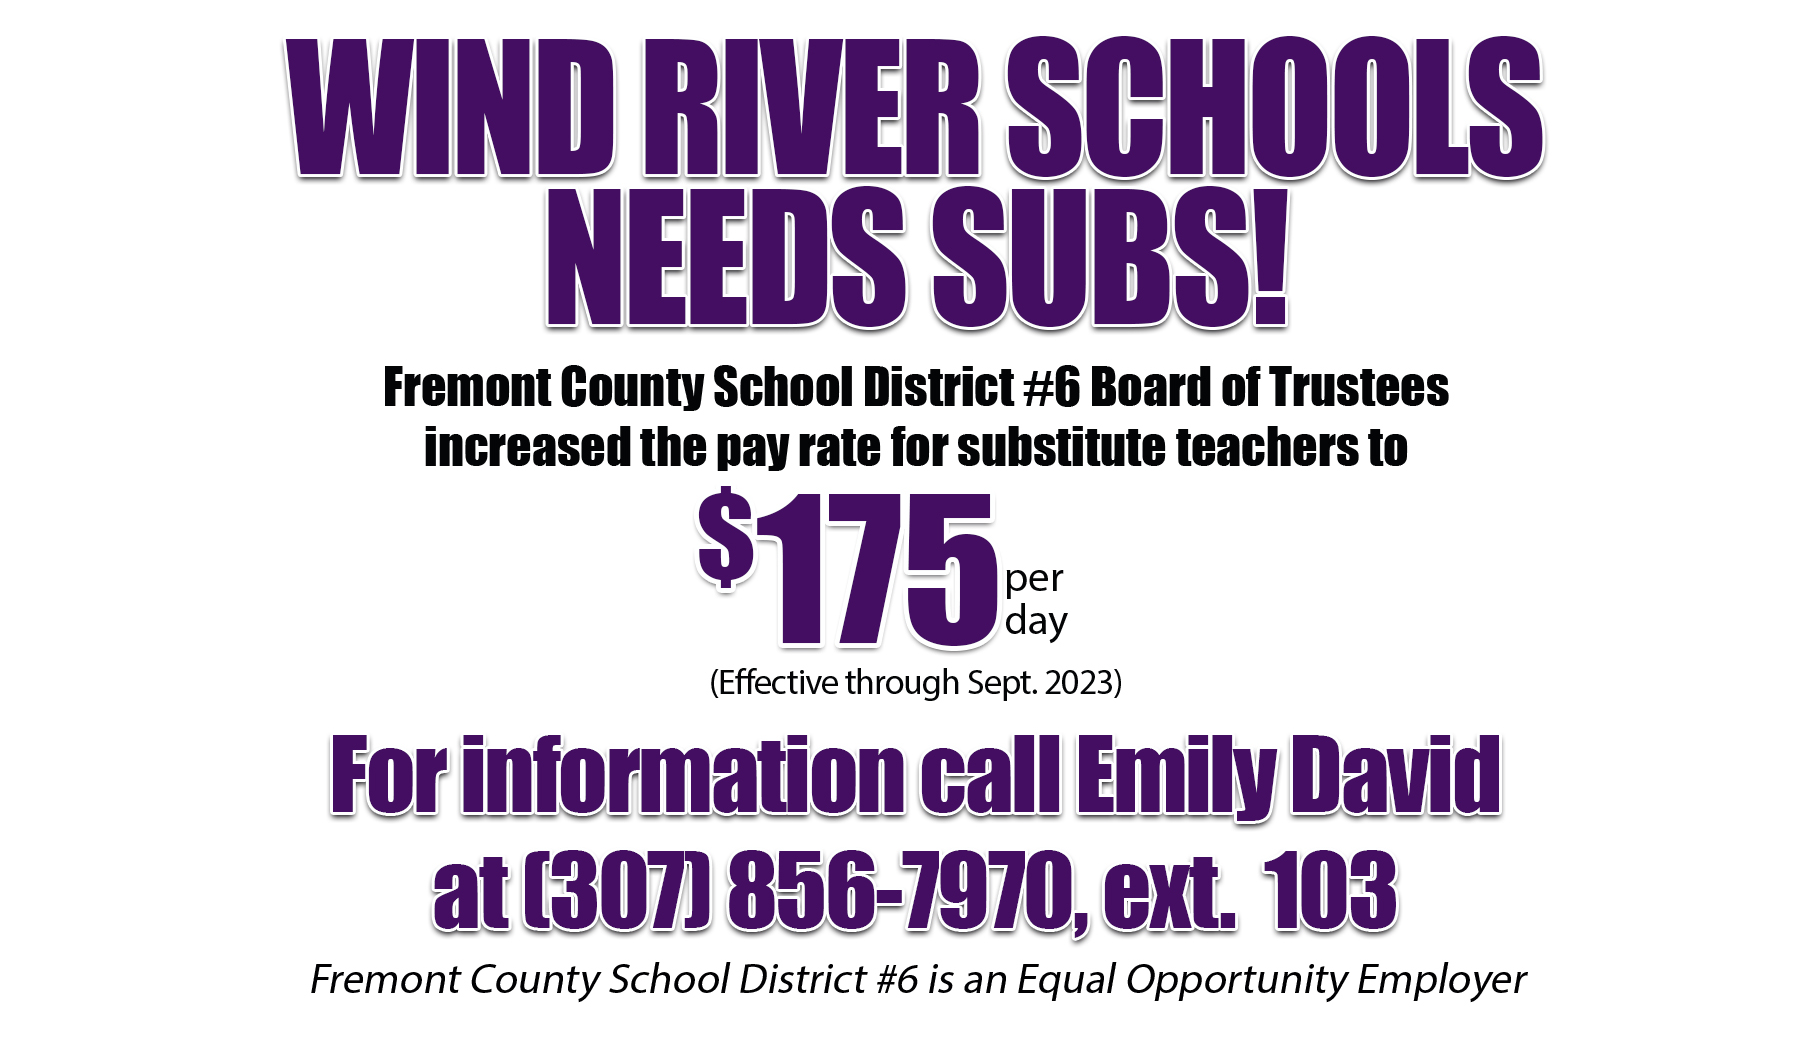 Wind River Schools needs subs . Teacher subs earn $175/day through Sept. 2023. Call Emily David at 307-856-7970 ext. 103 for more information. FCSD6 is an equal opportunity employer.